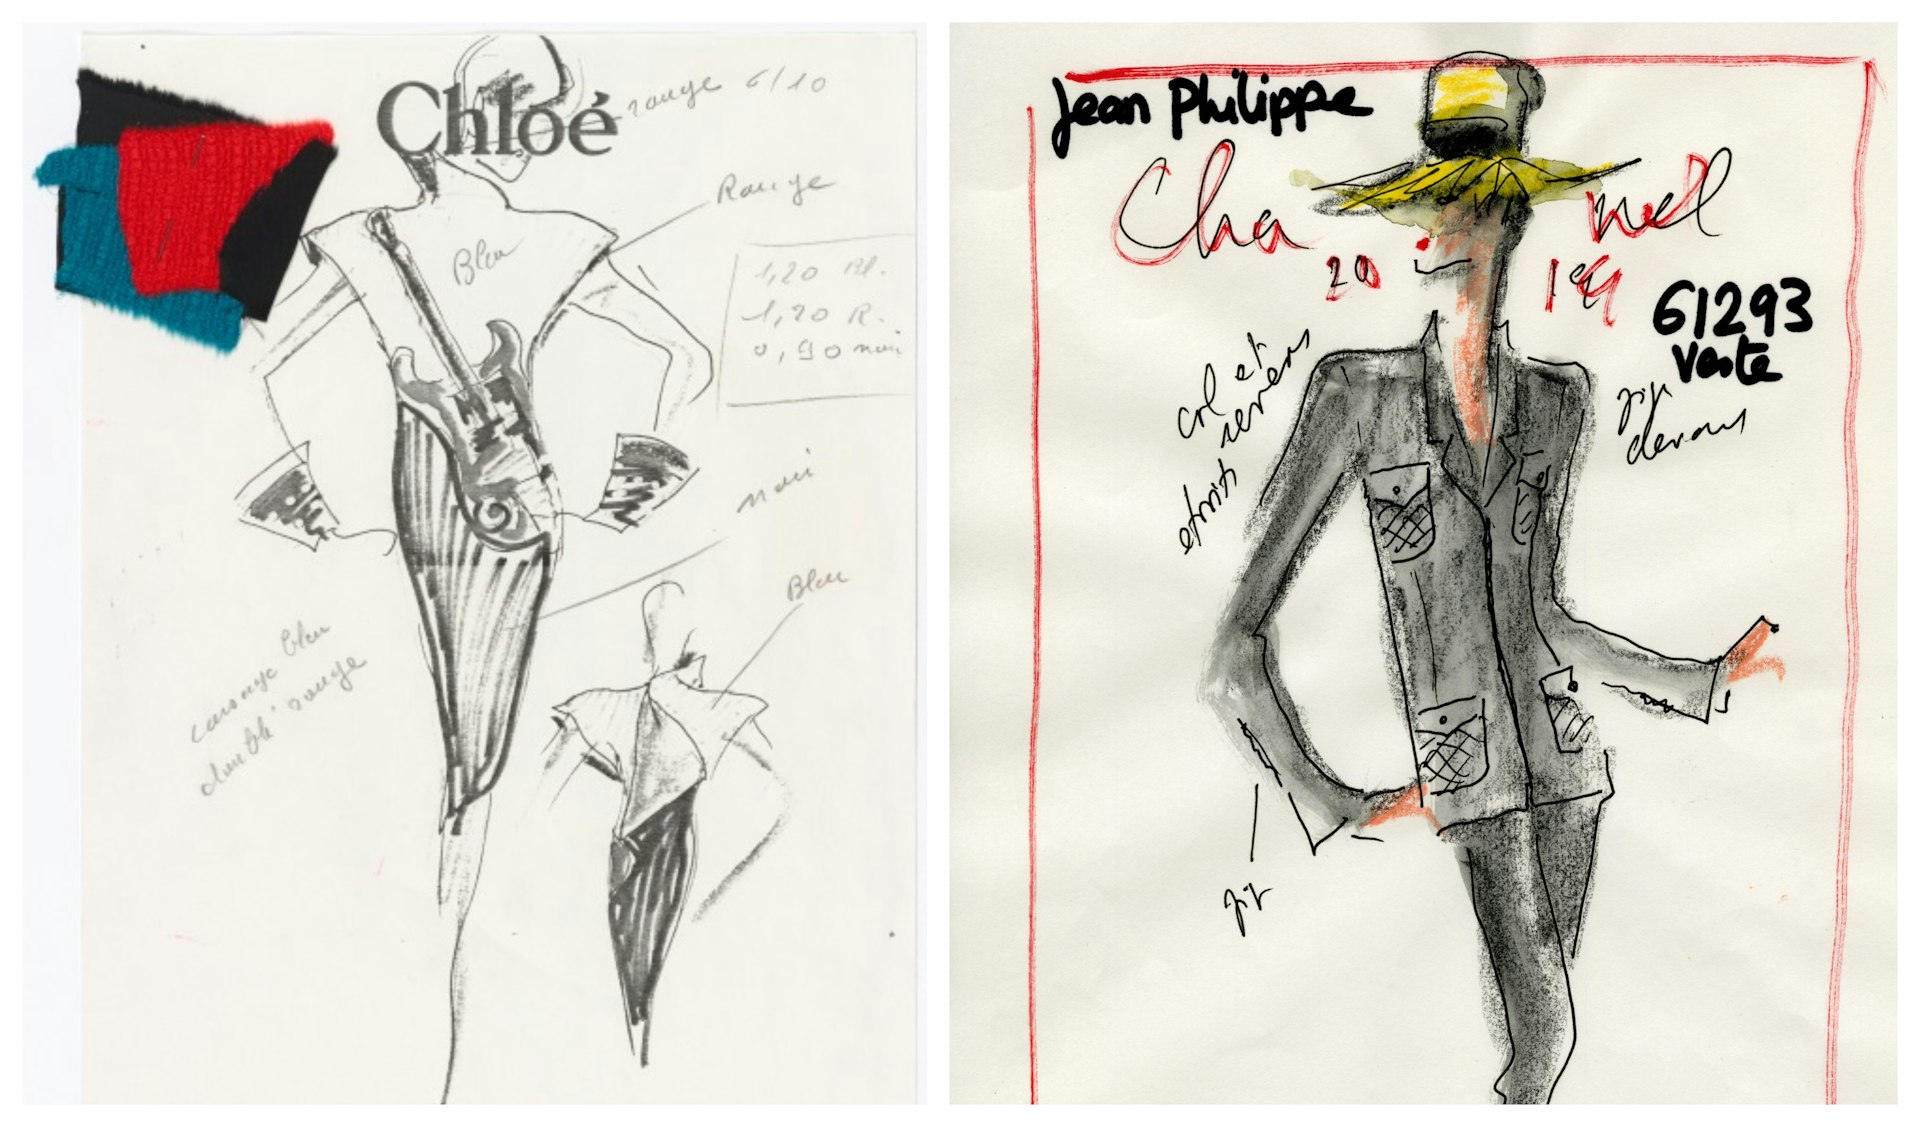 Karl Lagerfeld costume sketches for Chloe and Chanel design houses